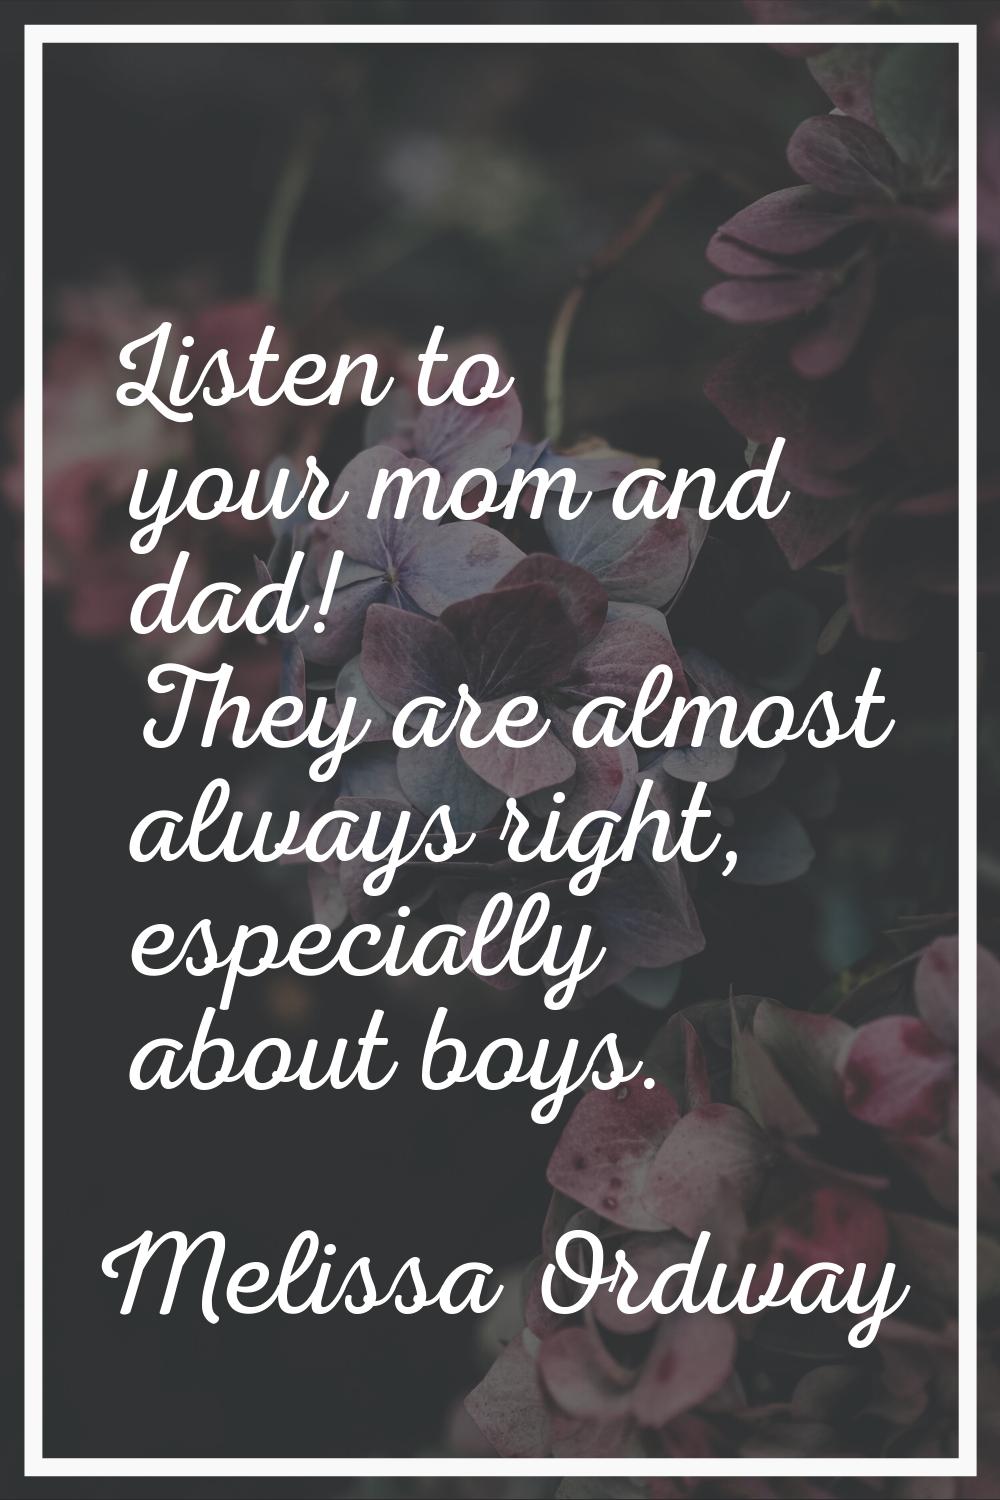 Listen to your mom and dad! They are almost always right, especially about boys.